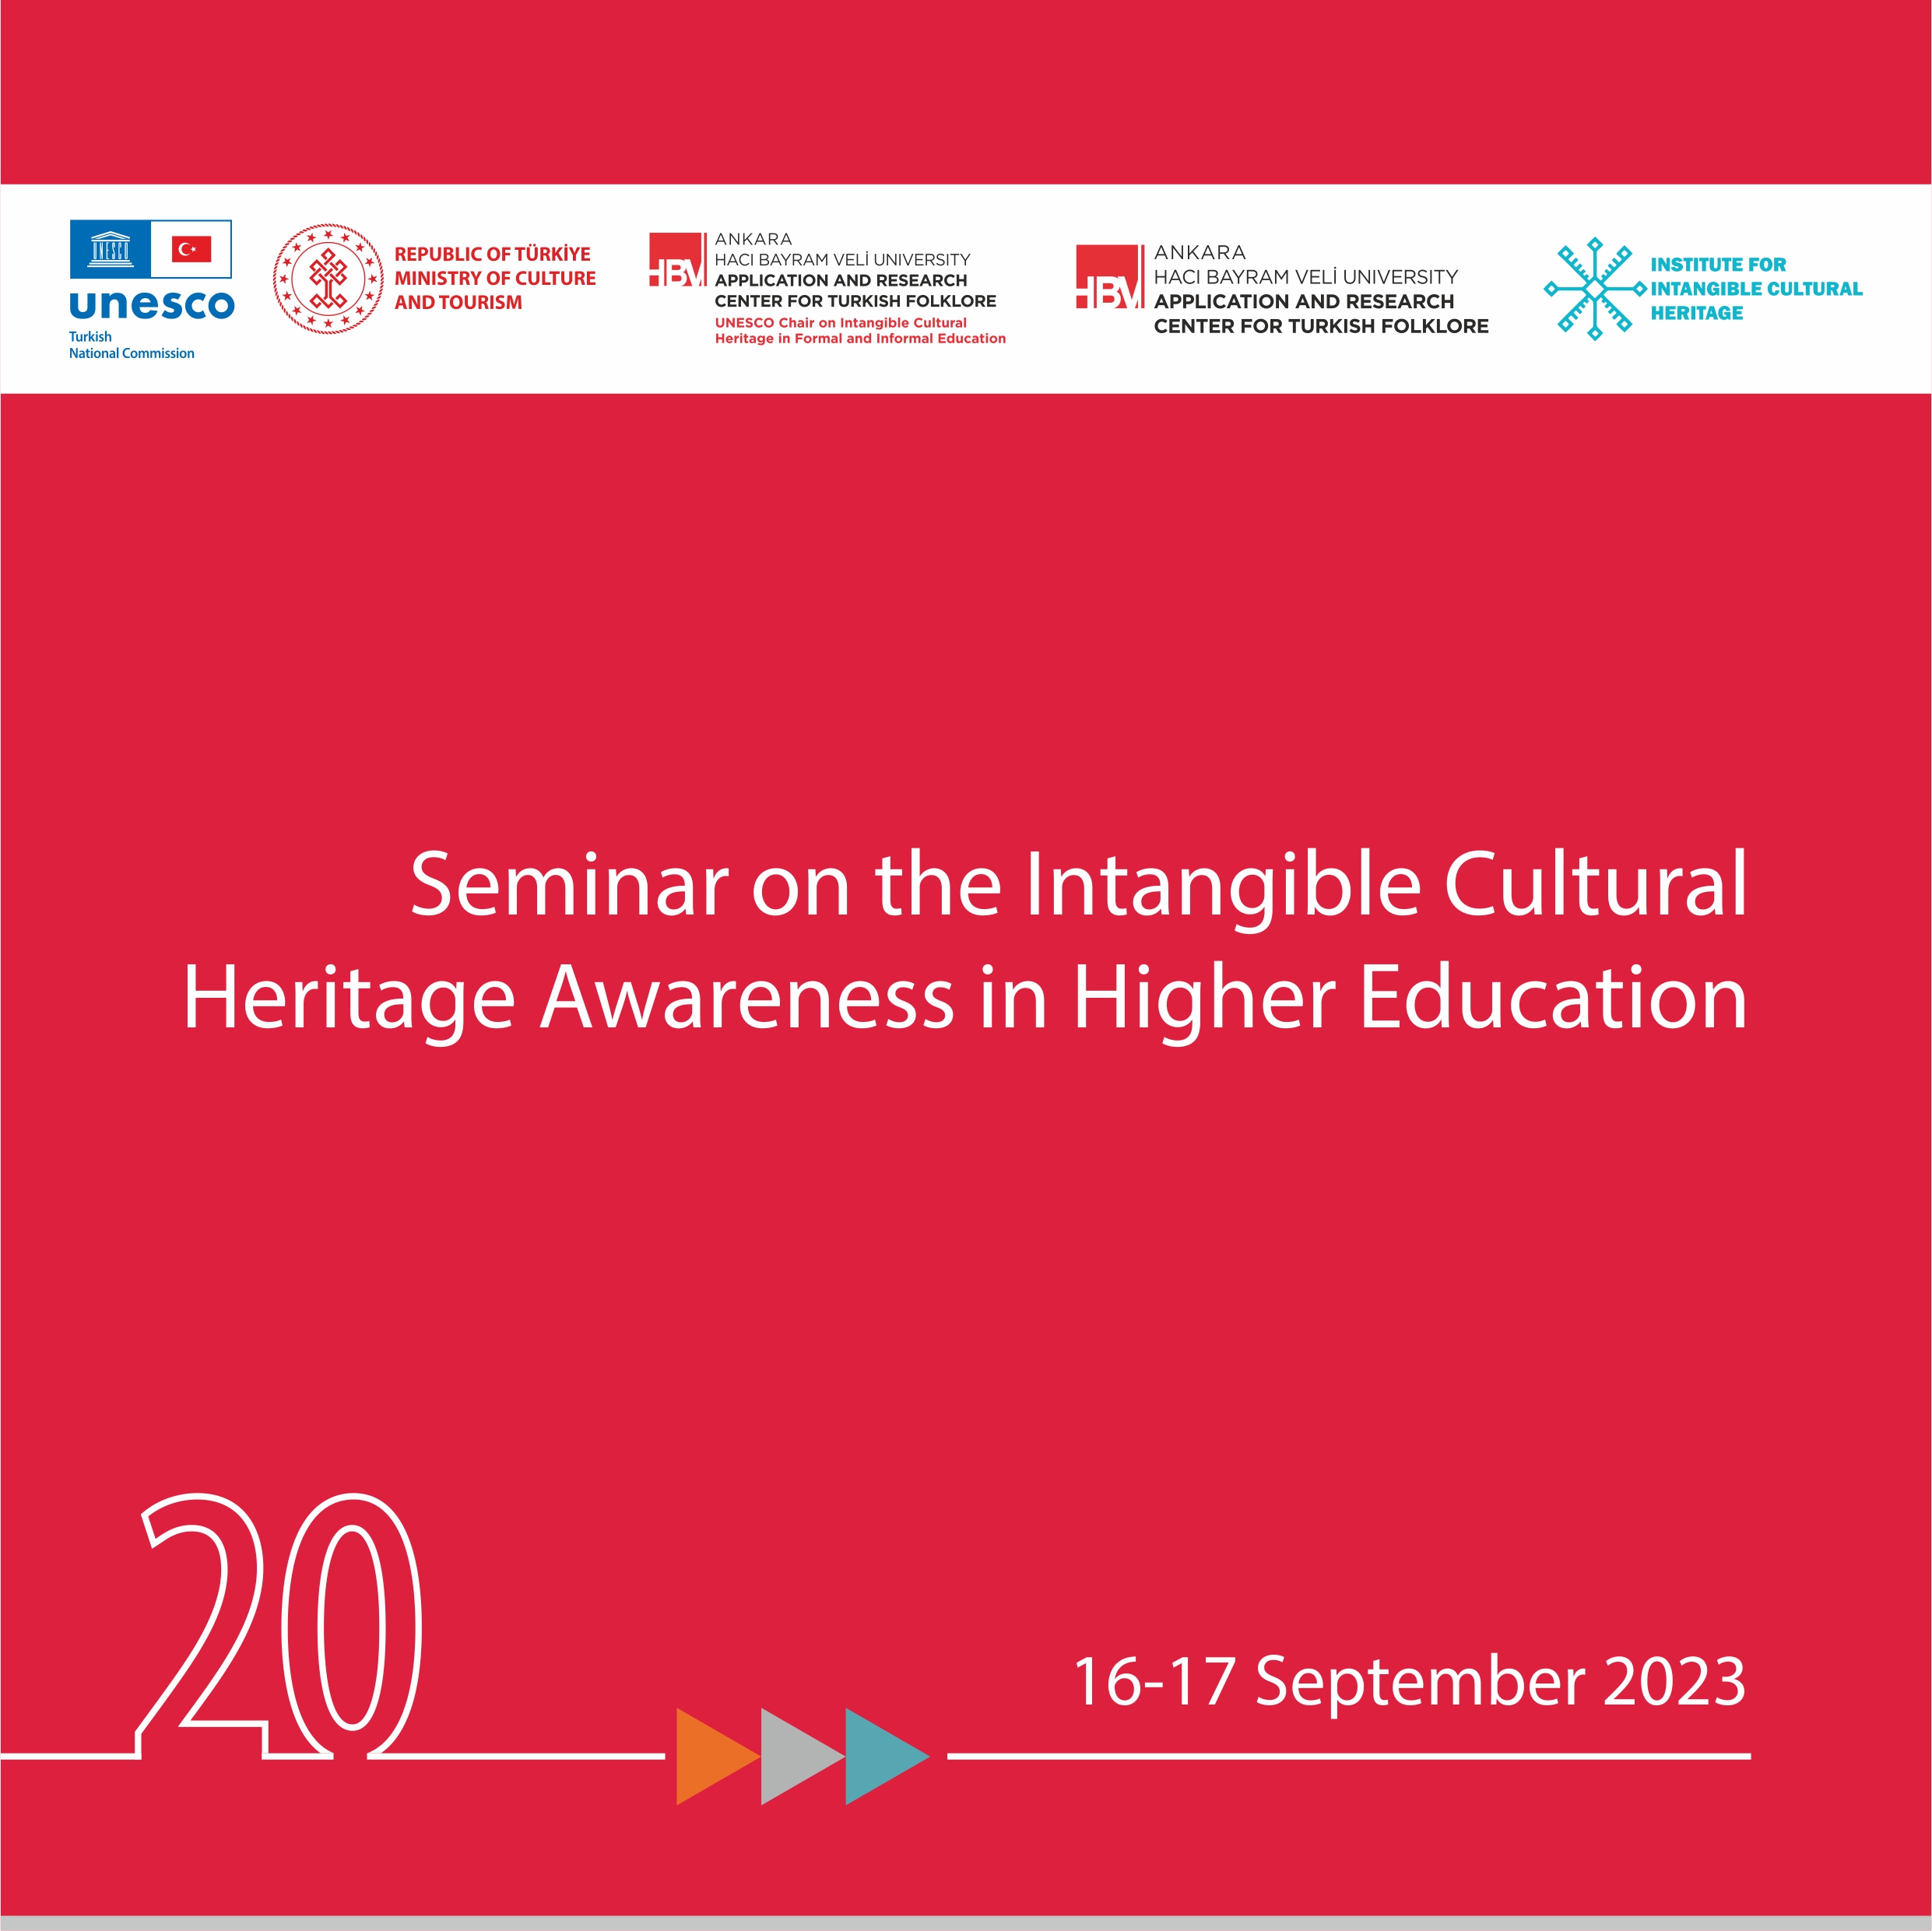 Seminar on the Intangible Cultural Heritage Awareness in Higher Education